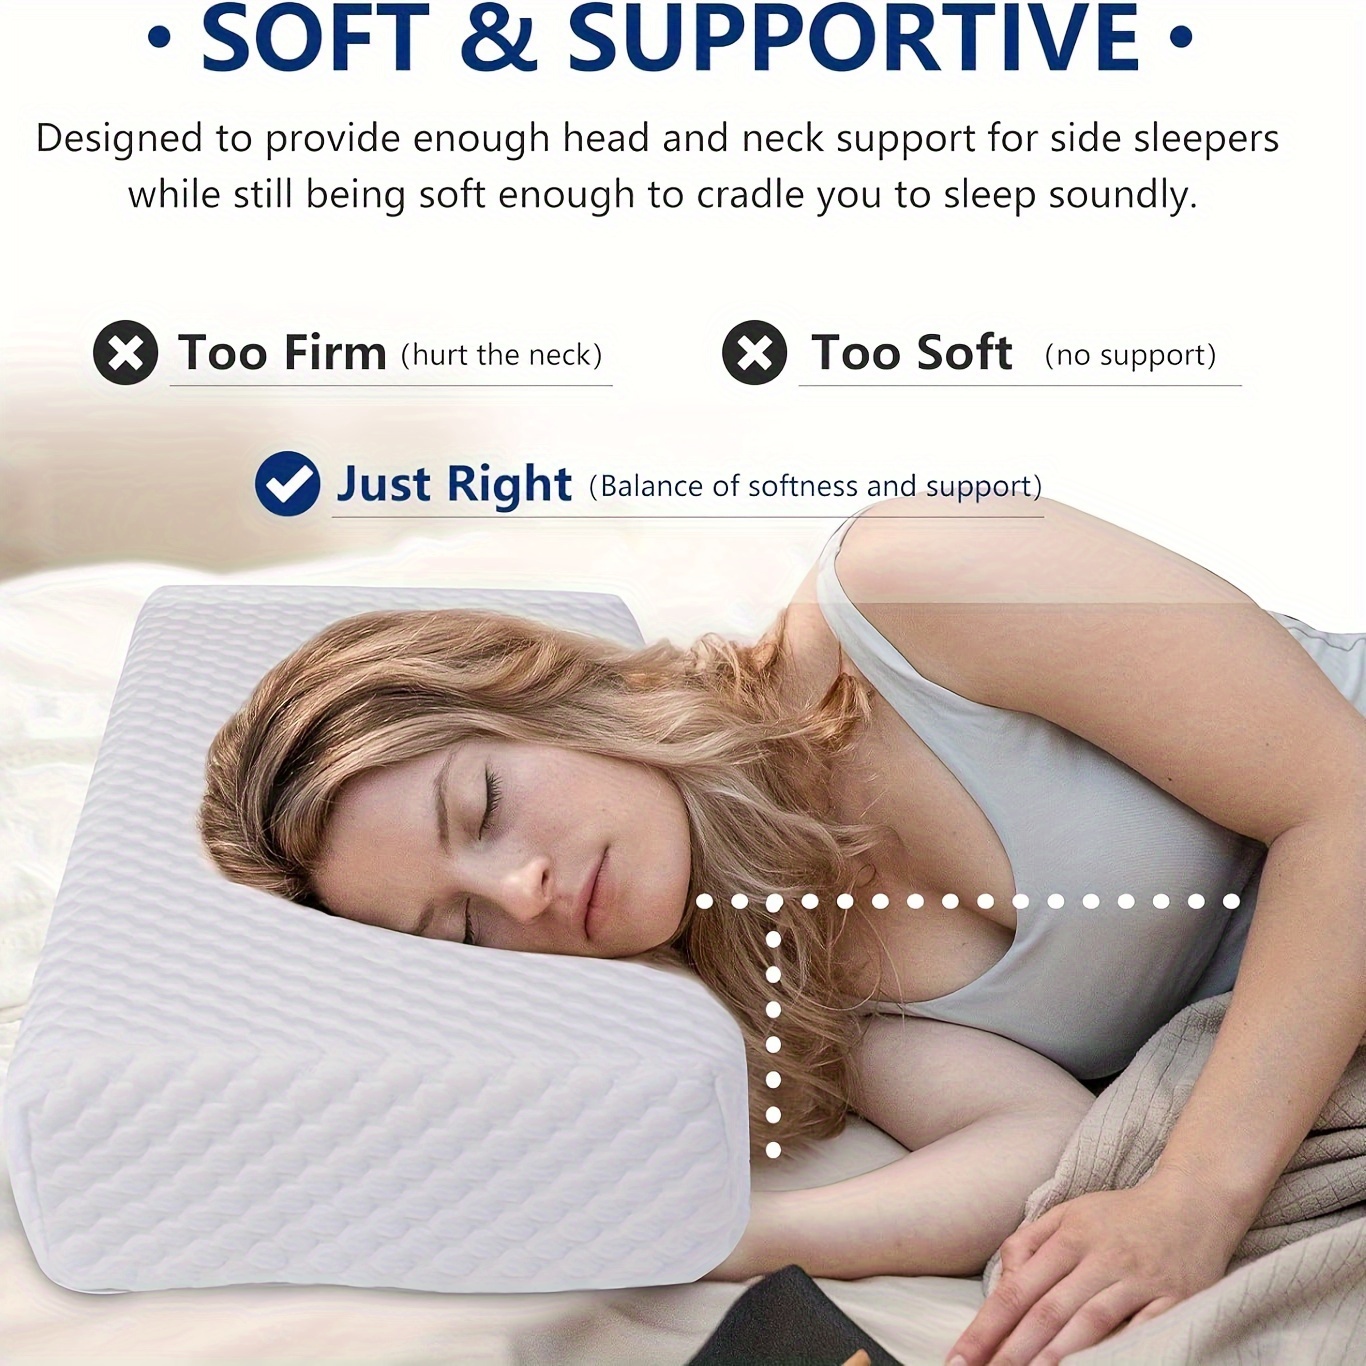 

1pc Cube Memory Foam Pillow Side Sleeper Pillow For Neck And Shoulder Protection, Cooling Bed Pillow For Side Sleeping, Soft And Supportive Cervical Pillow, Square Pillow